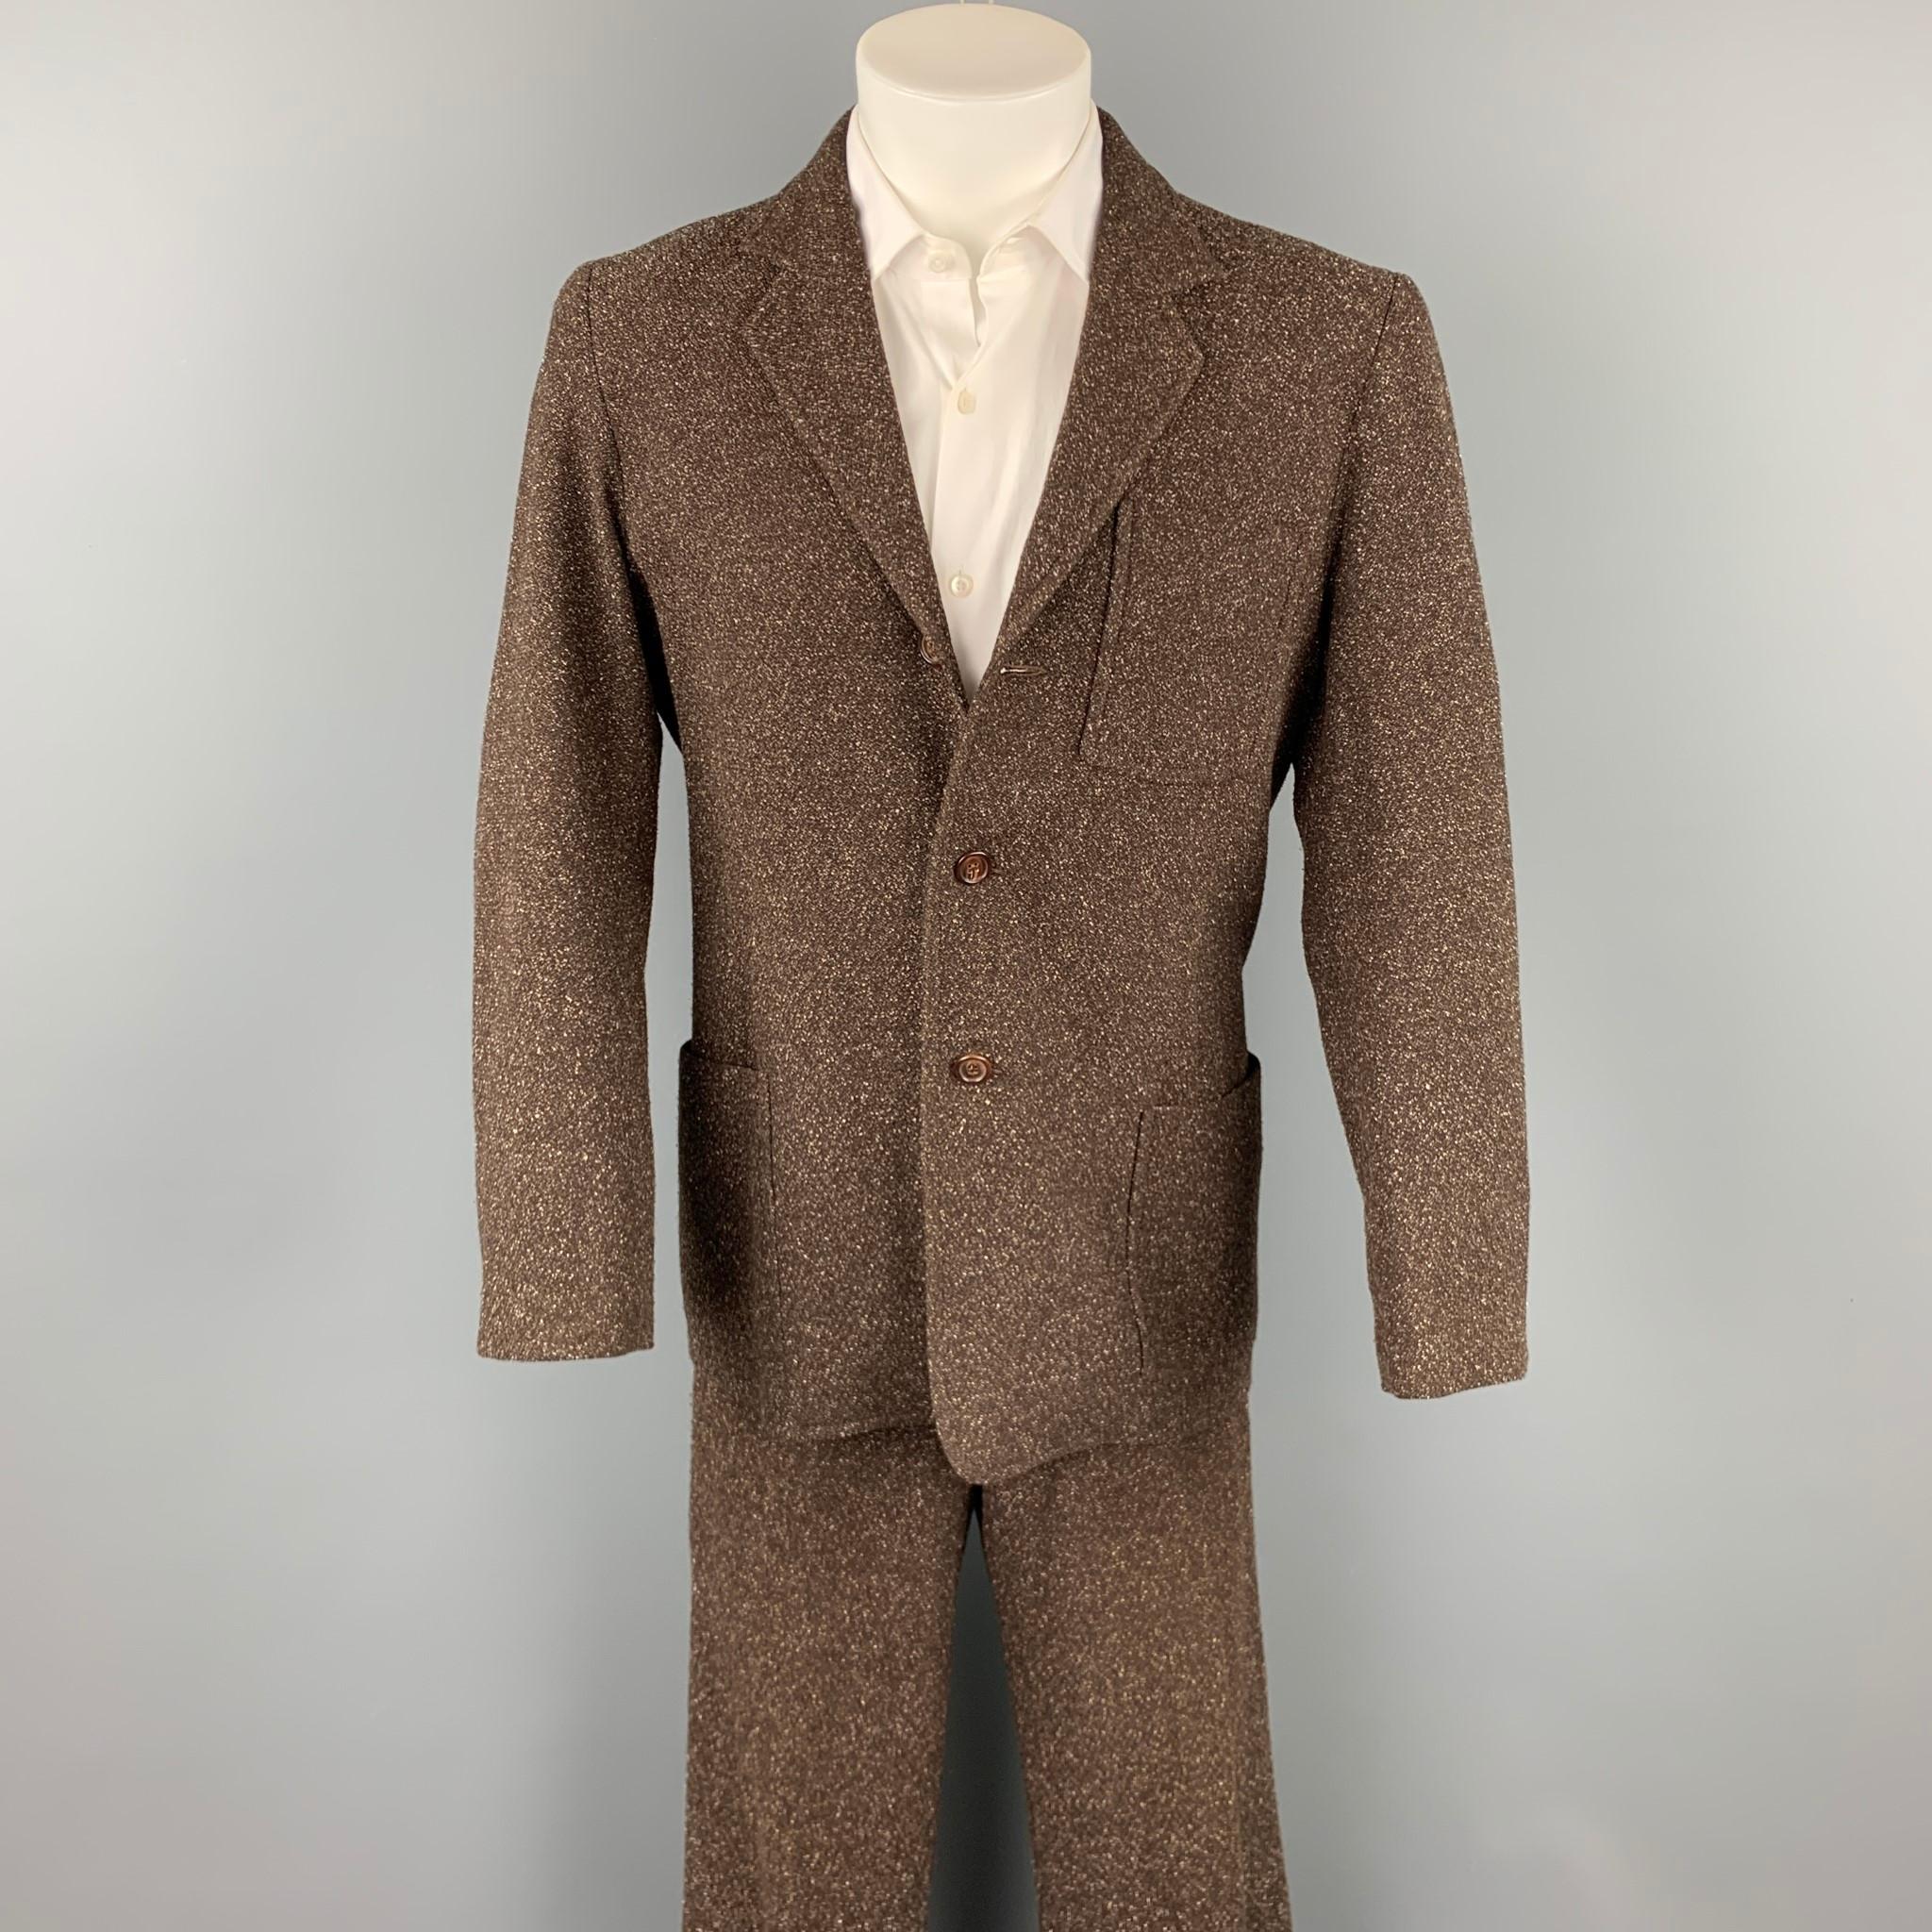 LAT NAYLOR suit comes in a brown heather polyester with a full liner and includes a single breasted, three button sport coat with a notch lapel and matching flat front trousers. Made in USA.

Very Good Pre-Owned Condition.
Marked: